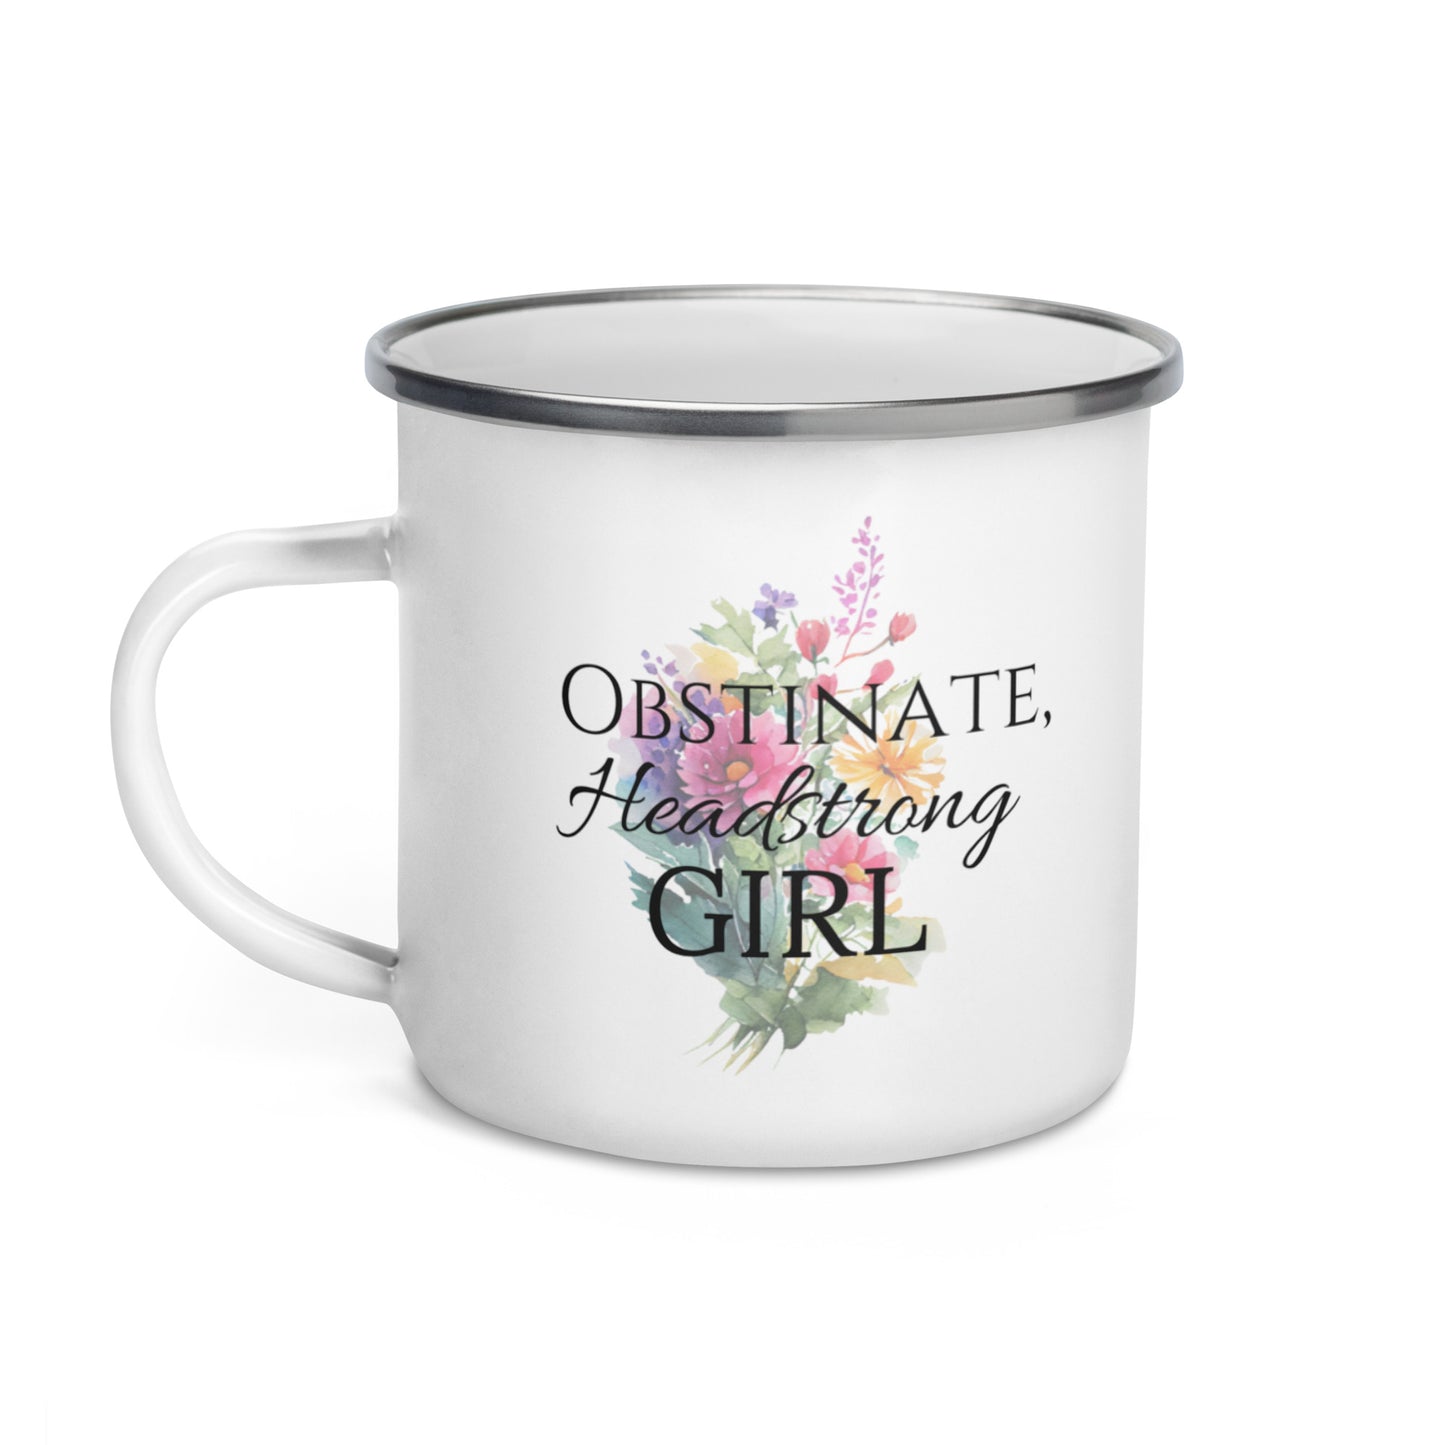 Obstinate, Headstrong Girl Enamel Mug with Flowers